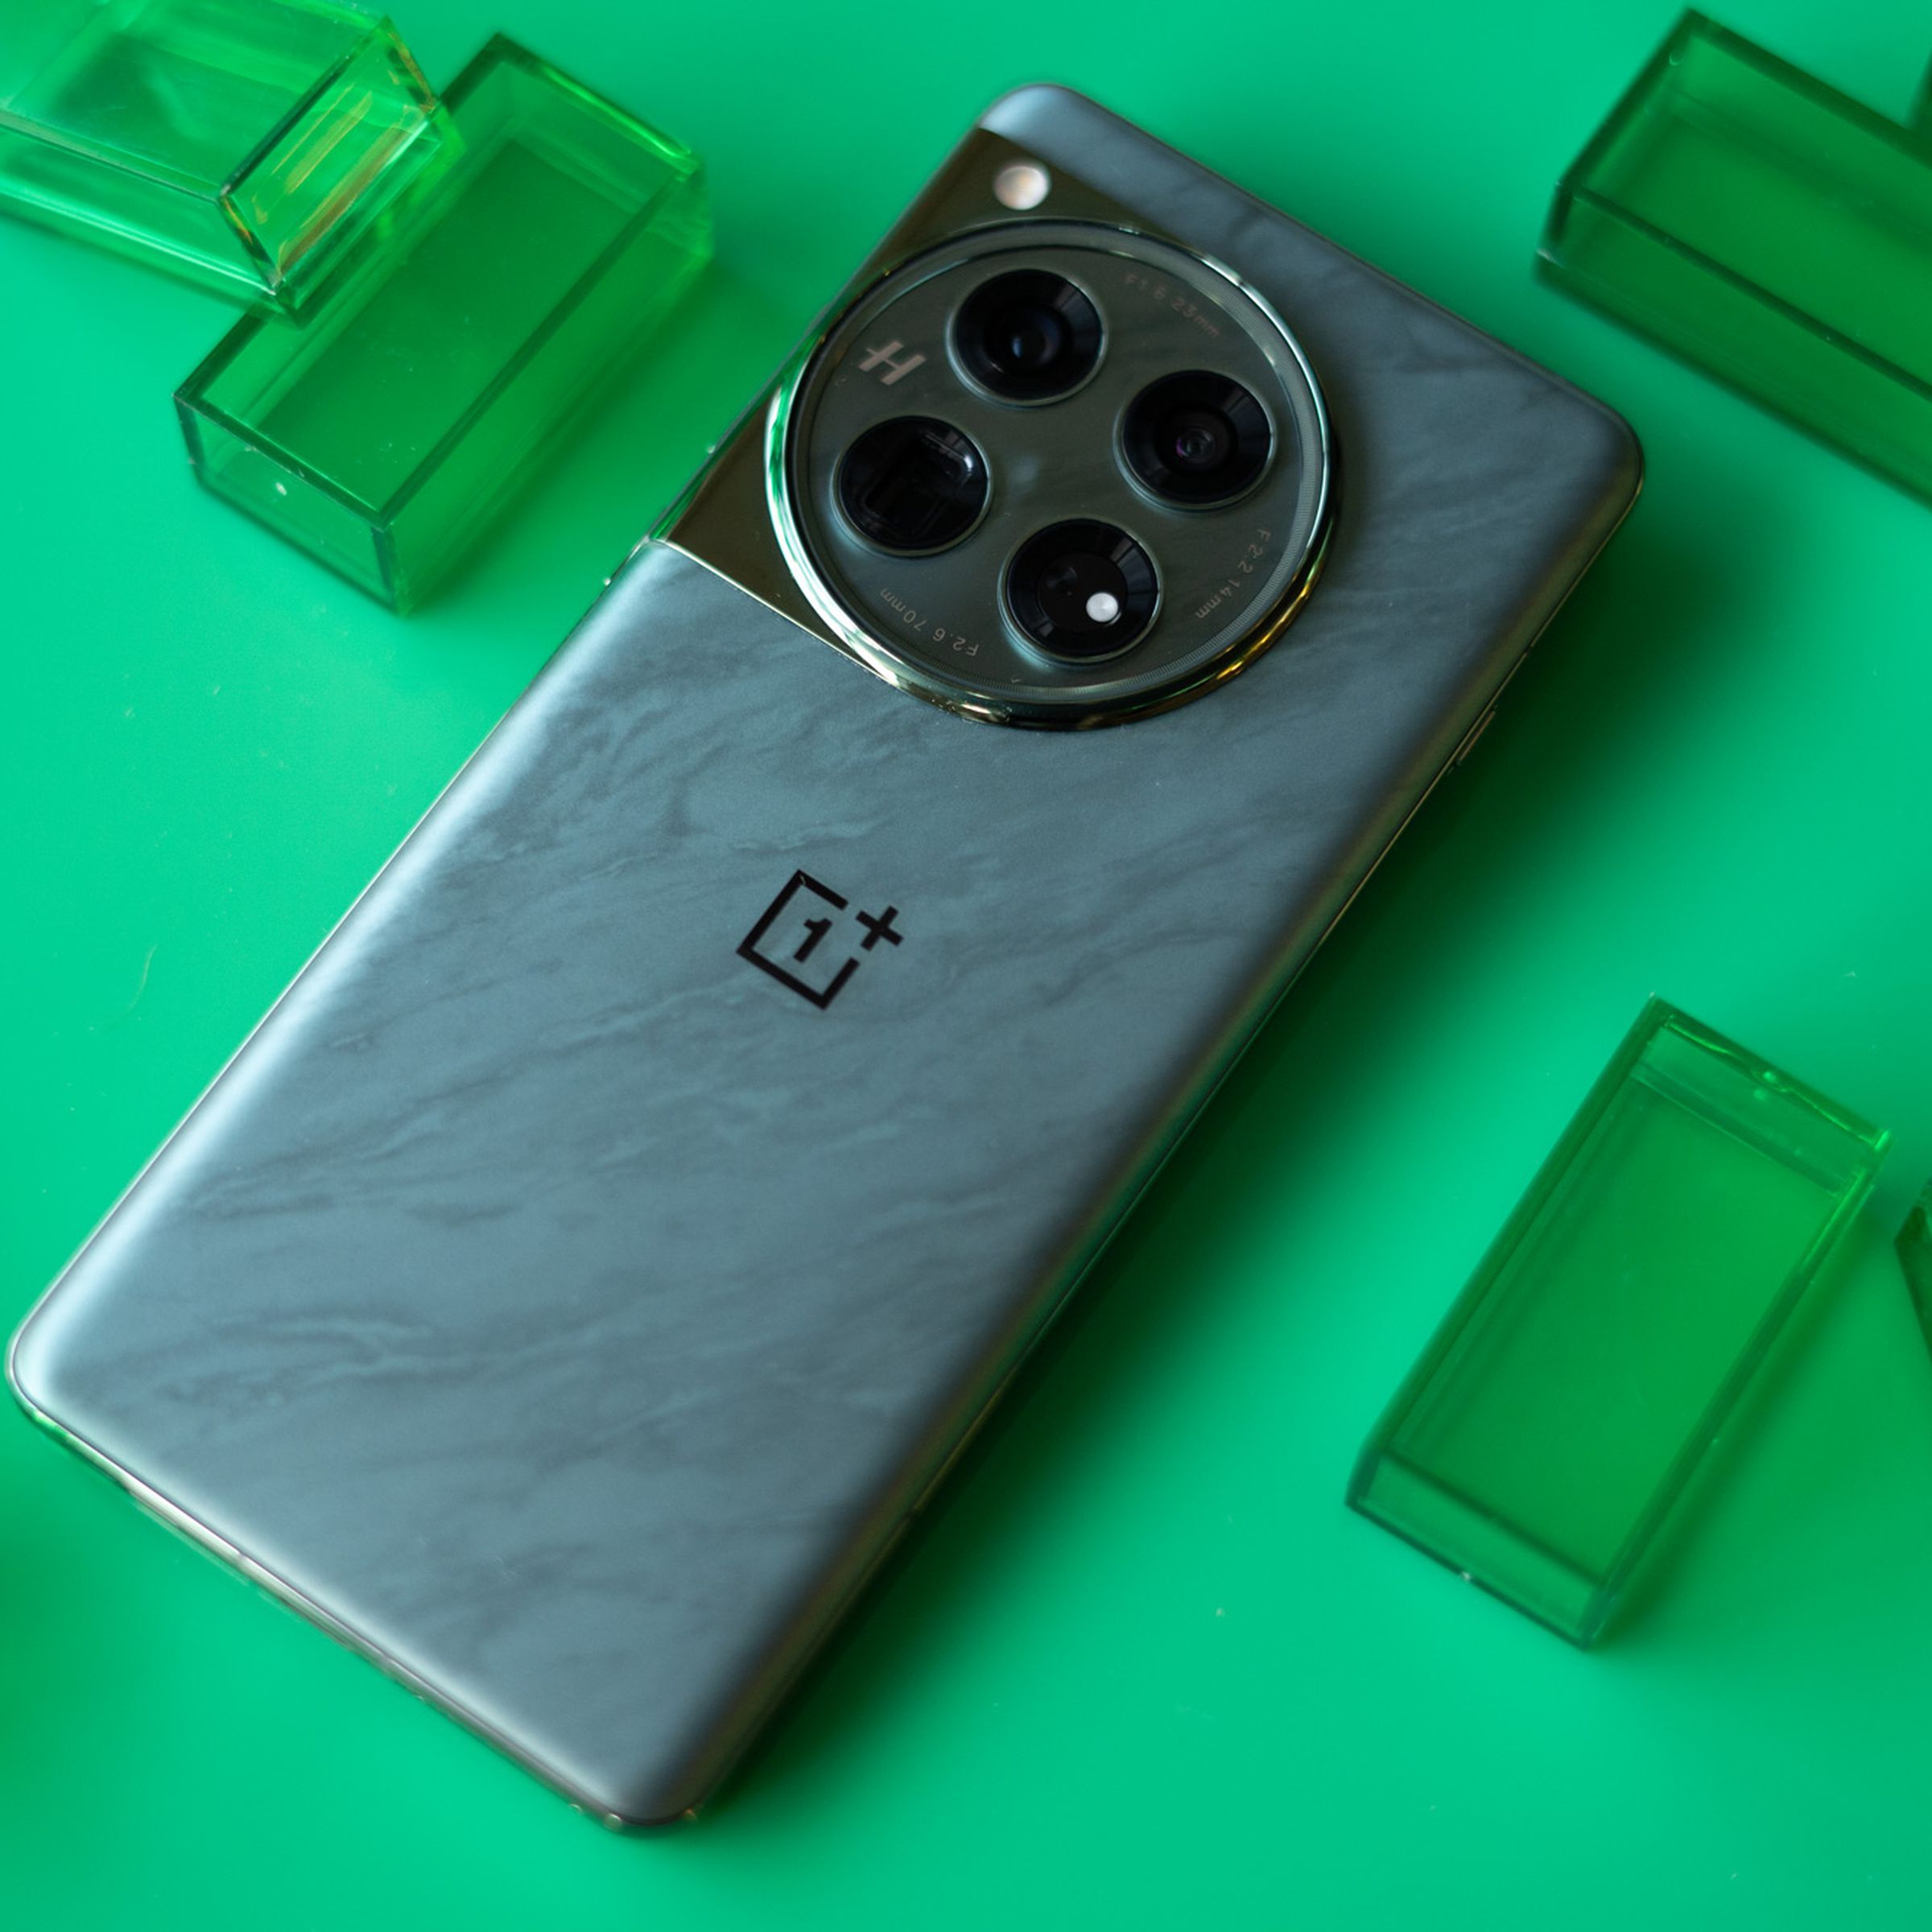 OnePlus 12 on a green background showing back panel of green color option.